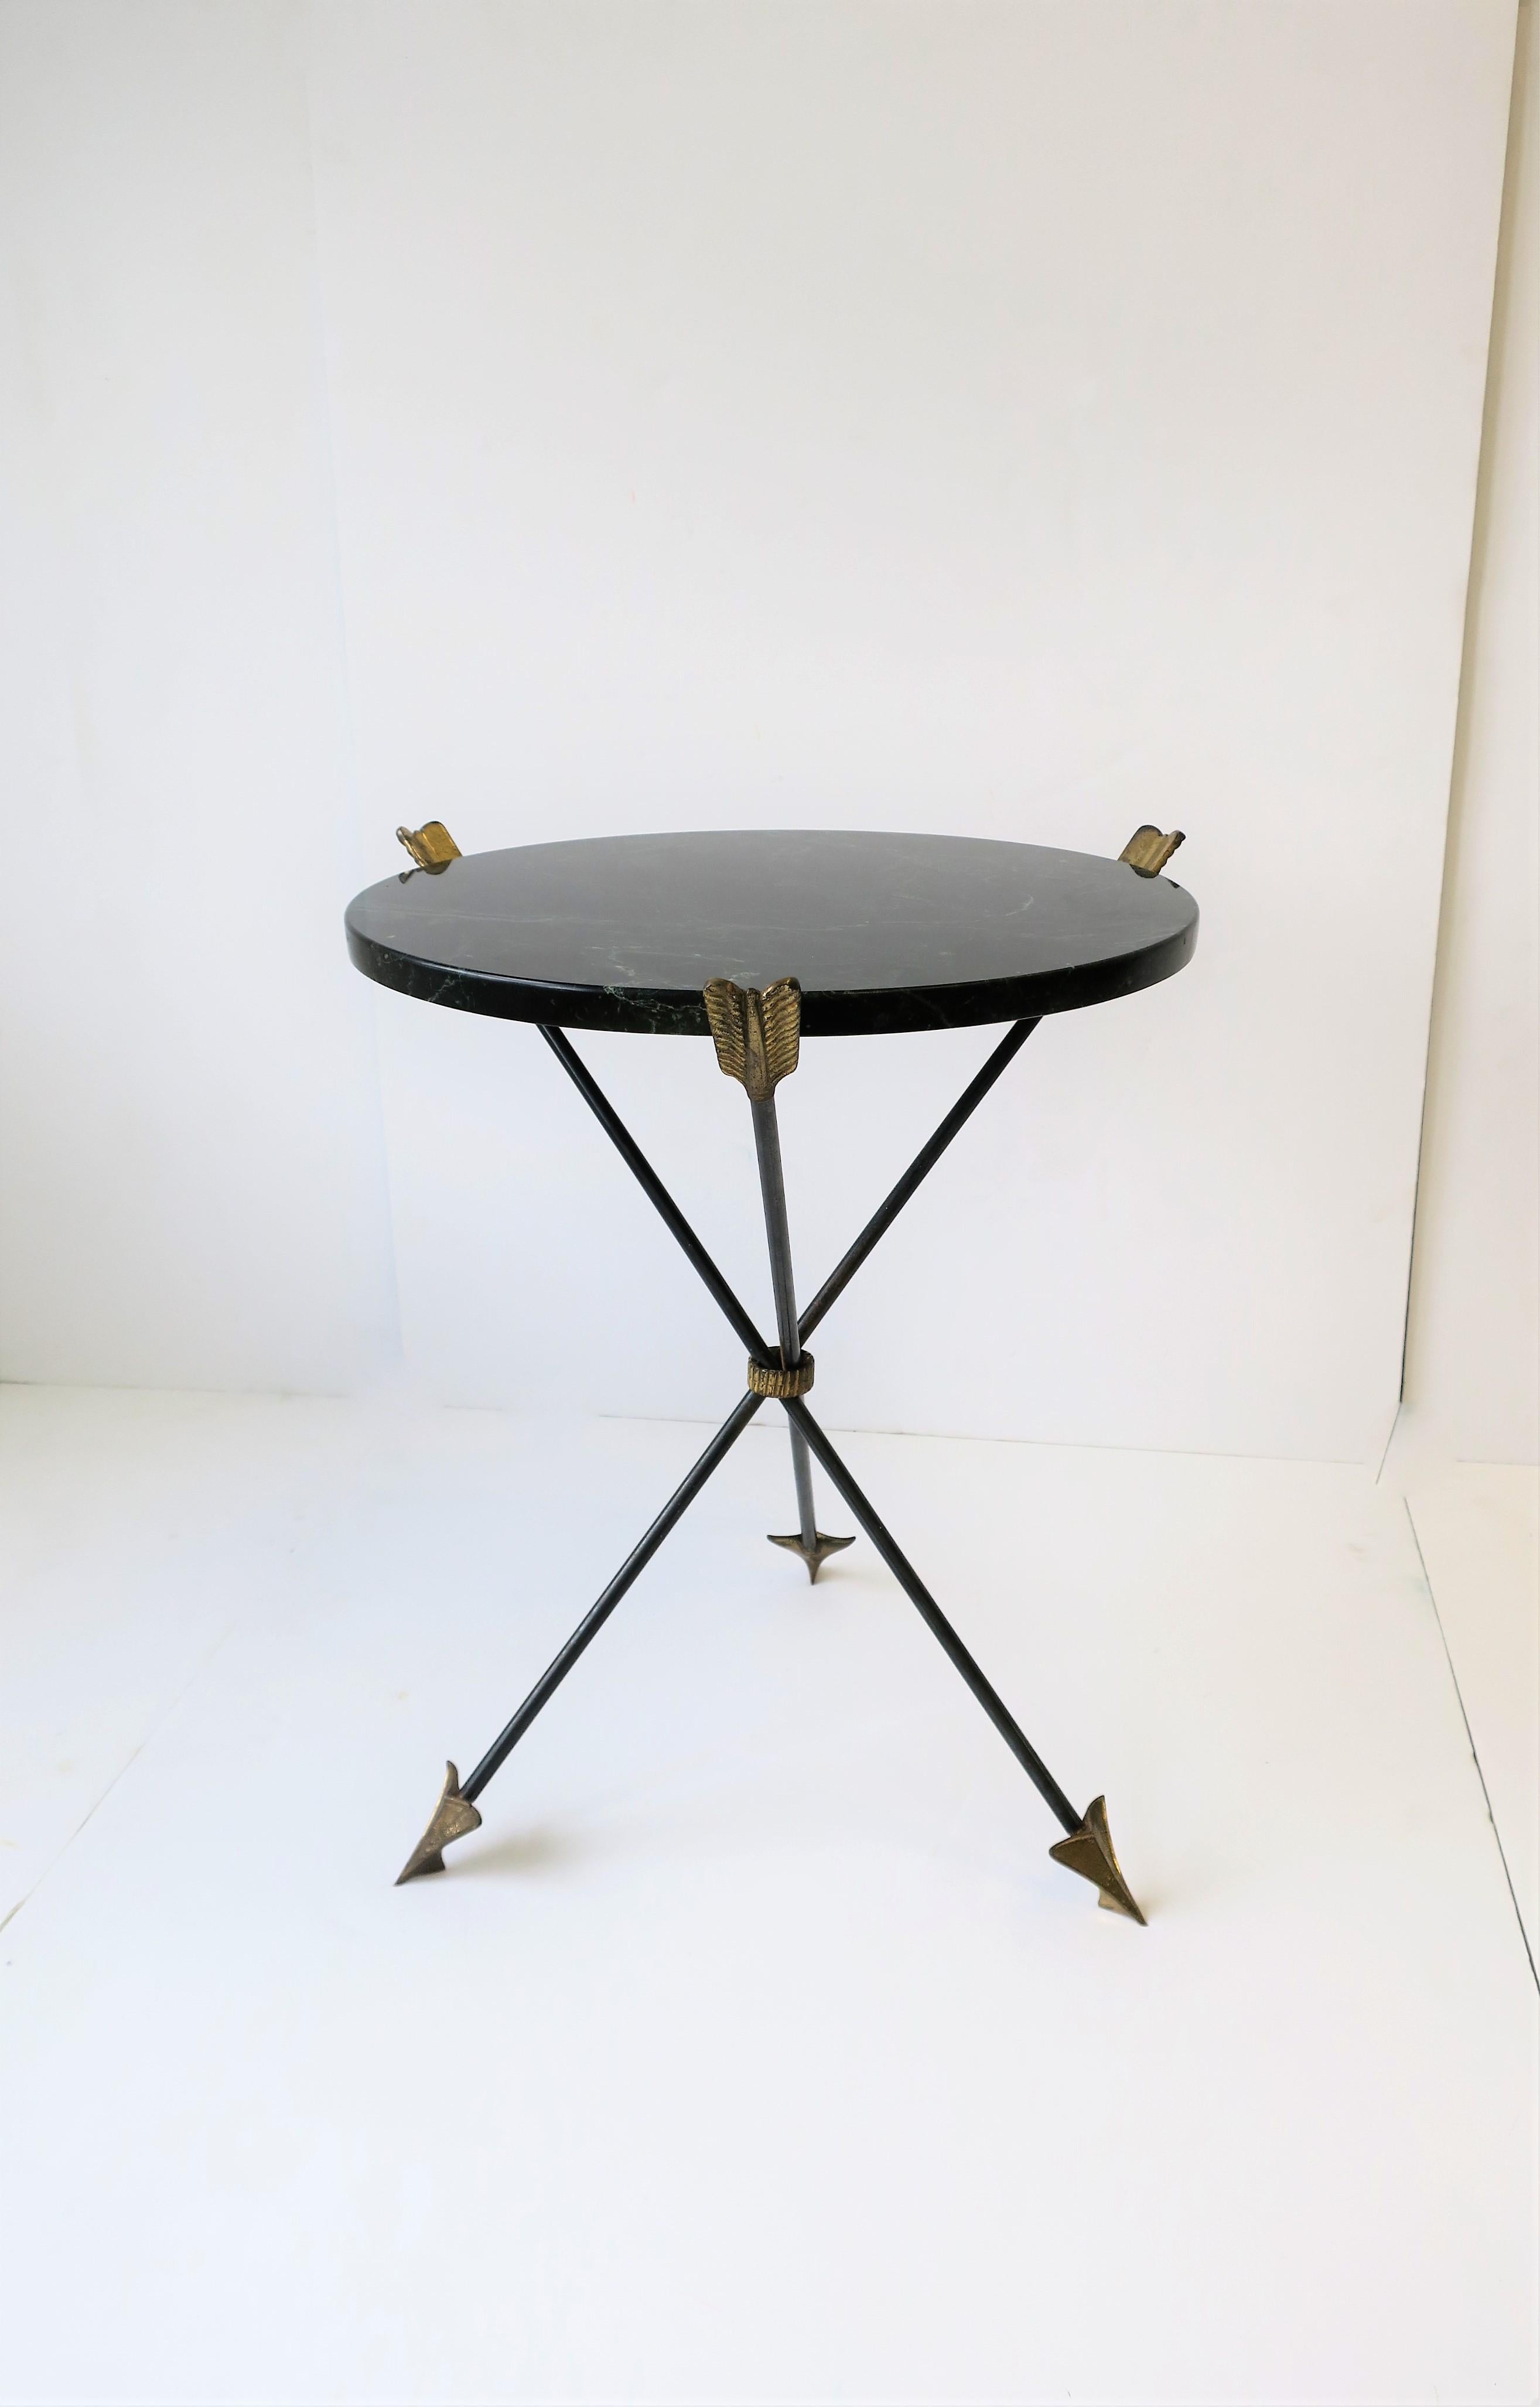 Midcentury Italian neoclassical style dark green marble top side table or Guéridon with tripod base. Round side or drinks table has a dark green or 'hunter' green marble top with light green and white veining and very slight traces of gold, that